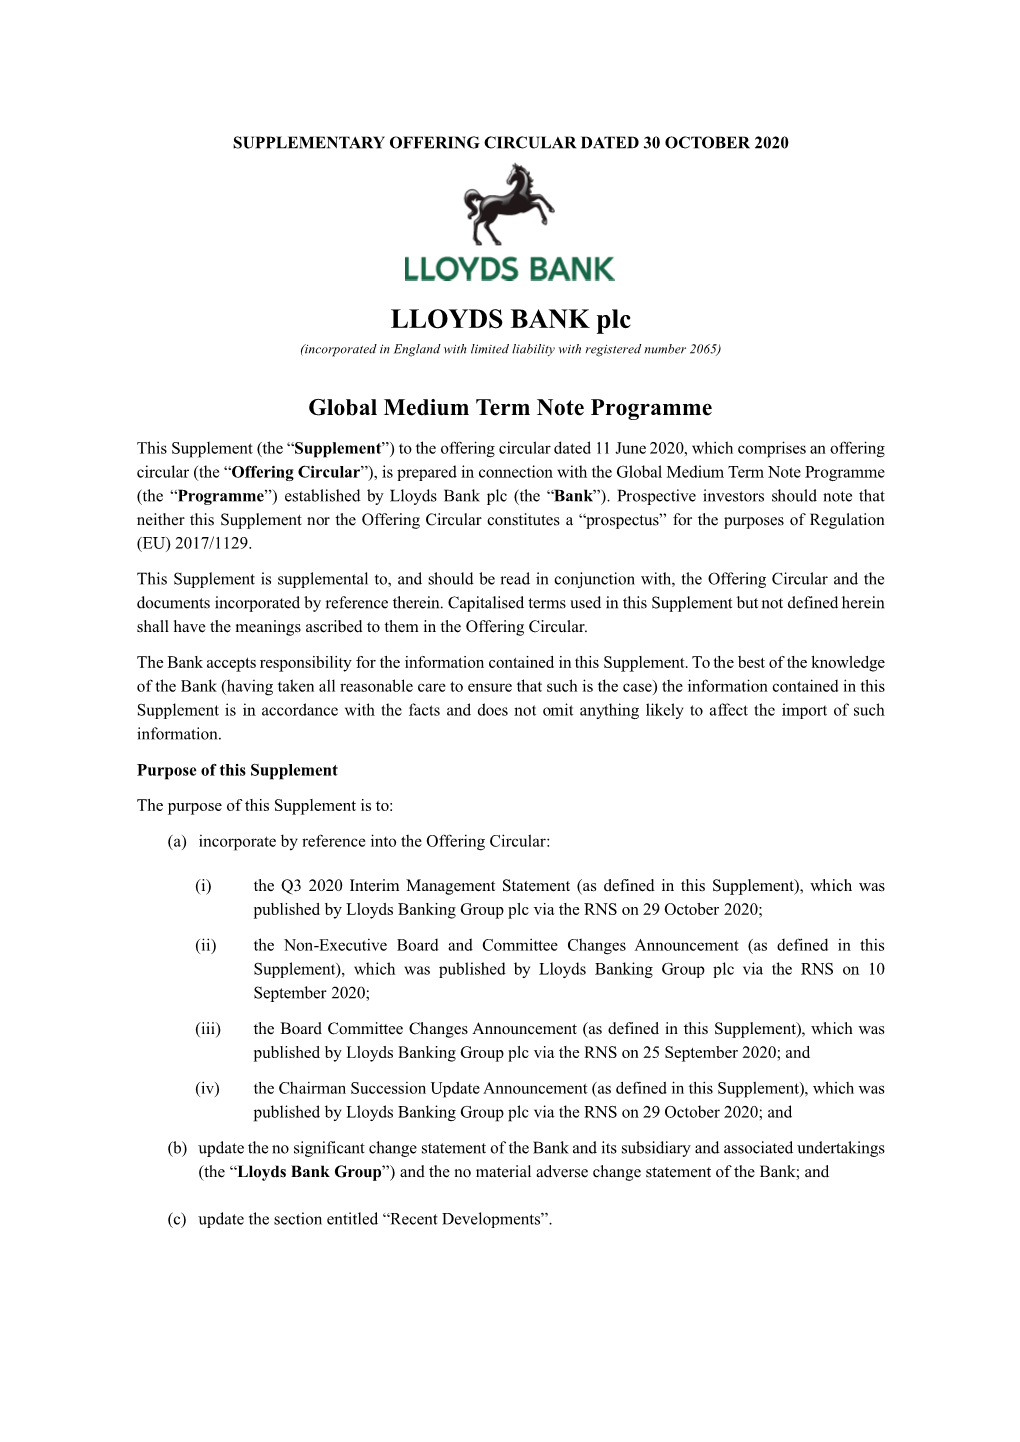 LLOYDS BANK Plc (Incorporated in England with Limited Liability with Registered Number 2065)